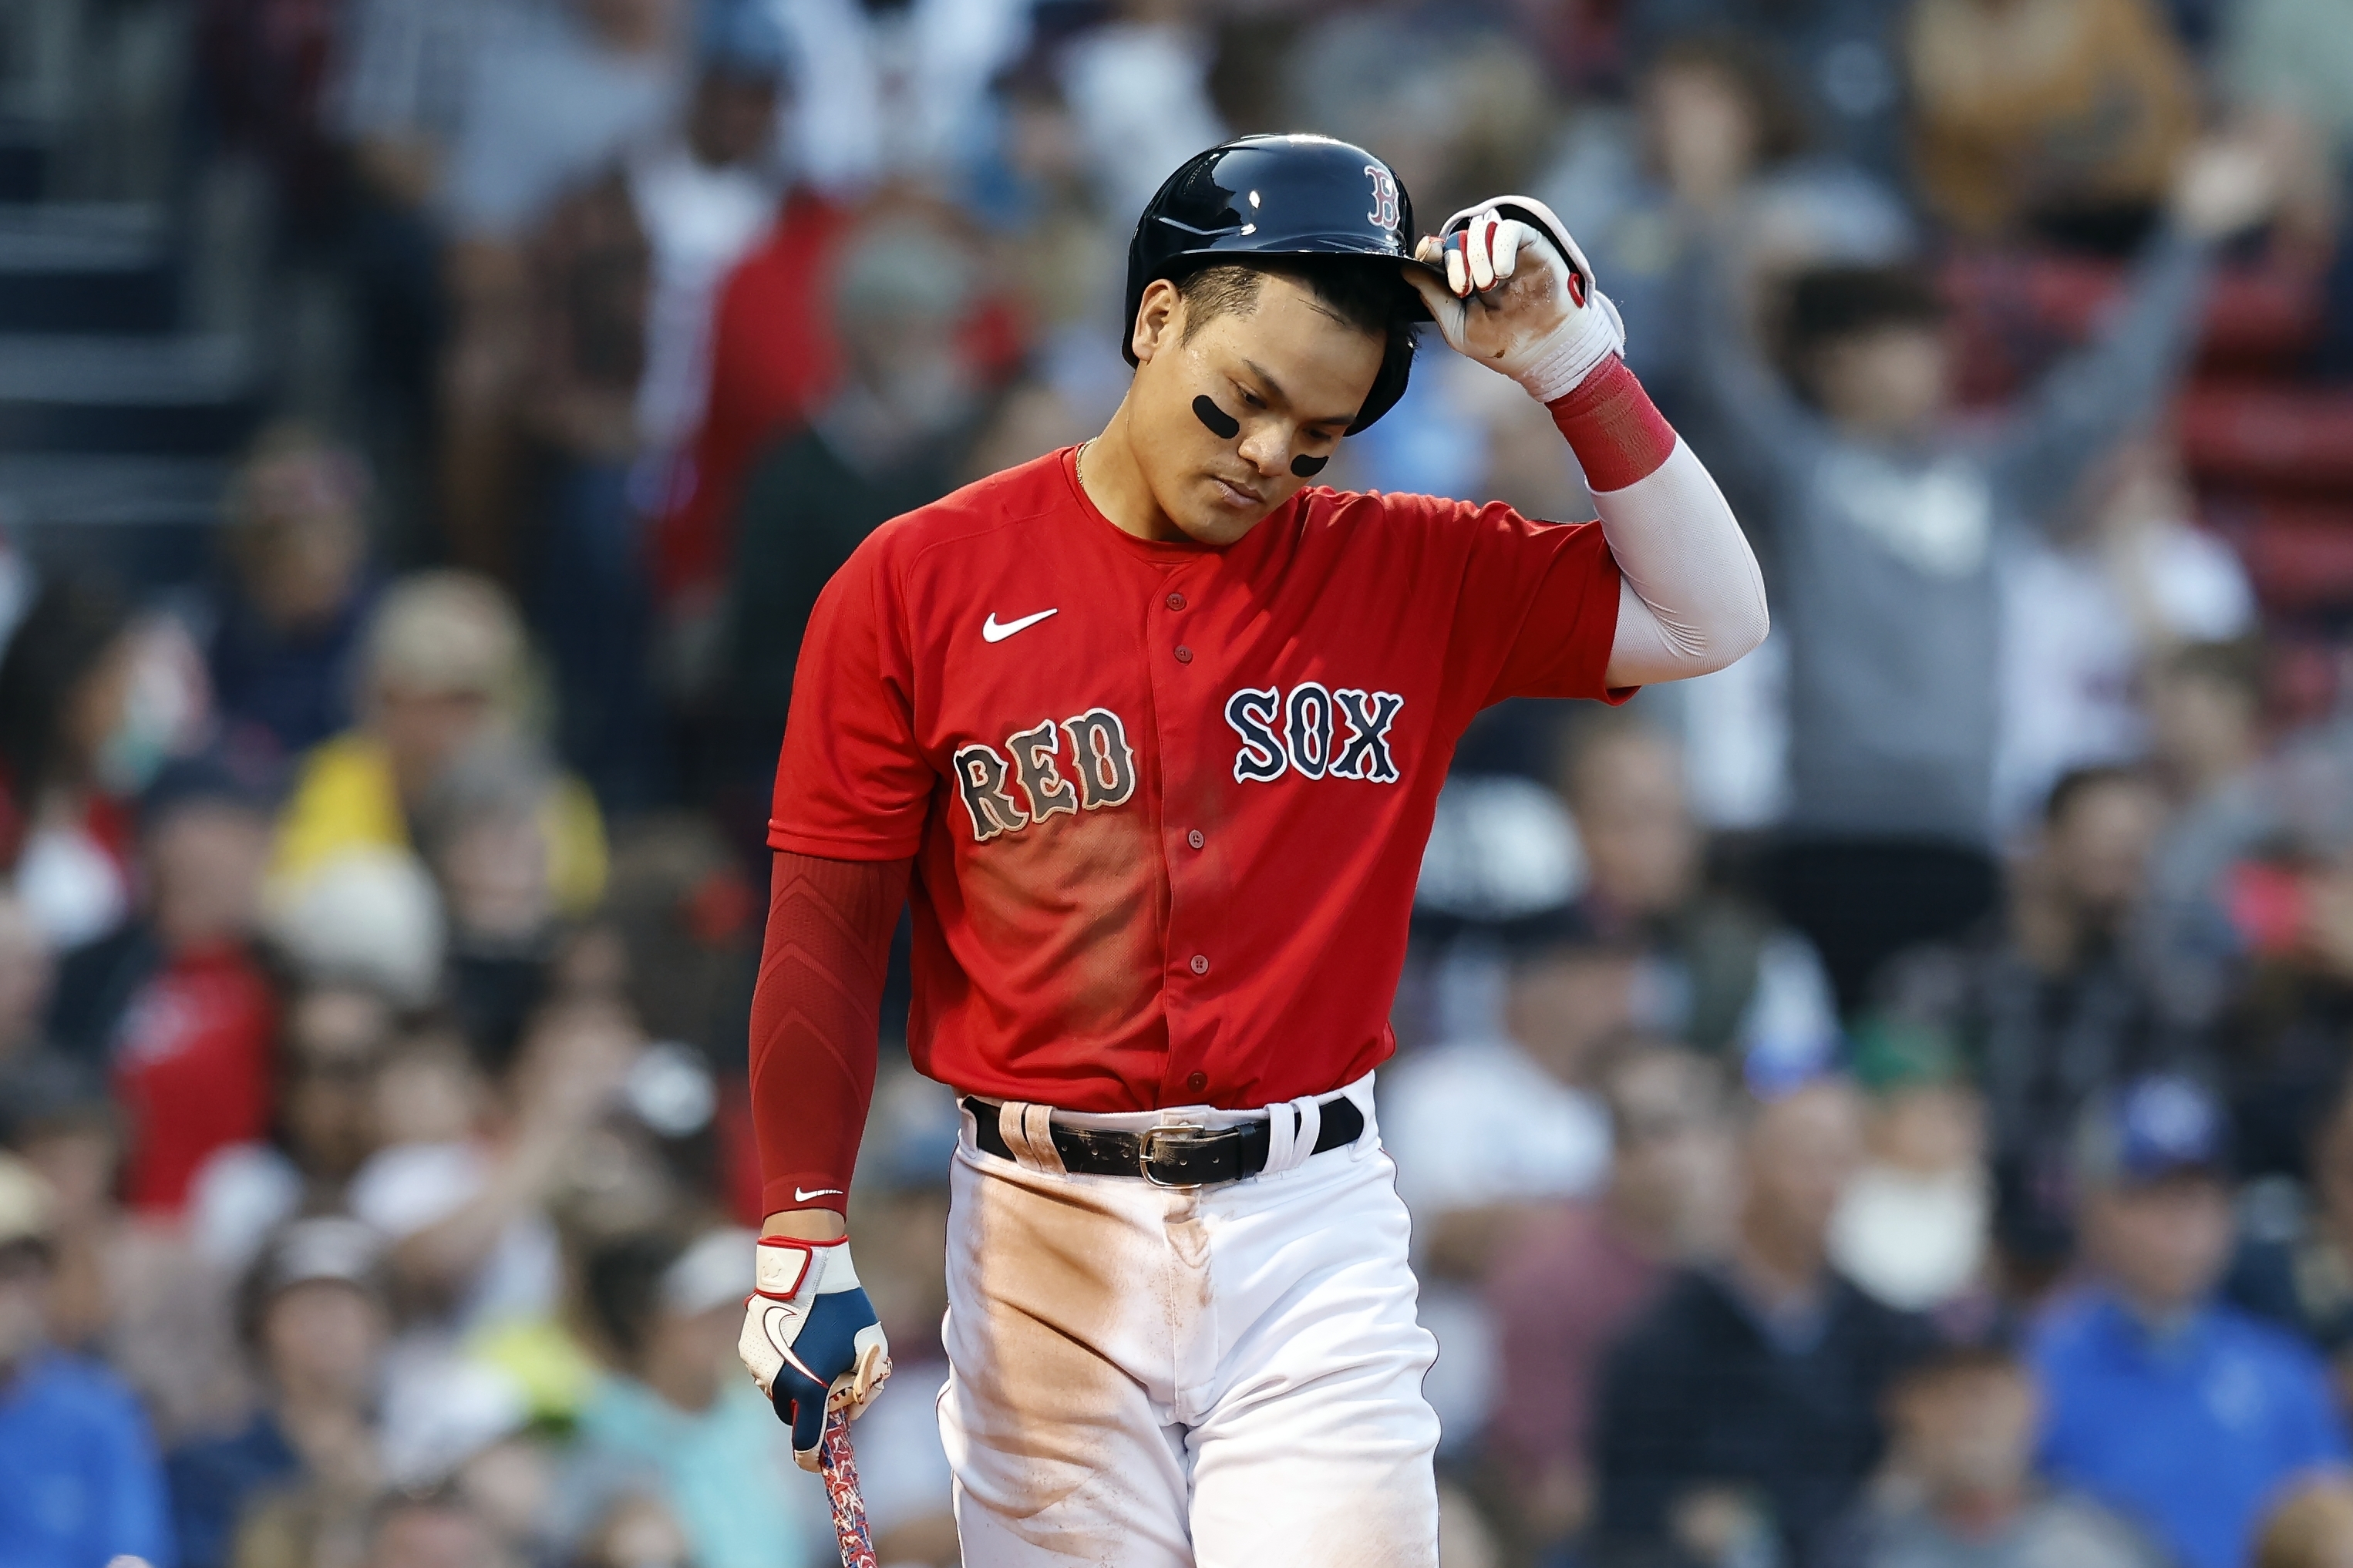 Red Sox Roster Moves: Chang and Wong to Make Team - Fastball